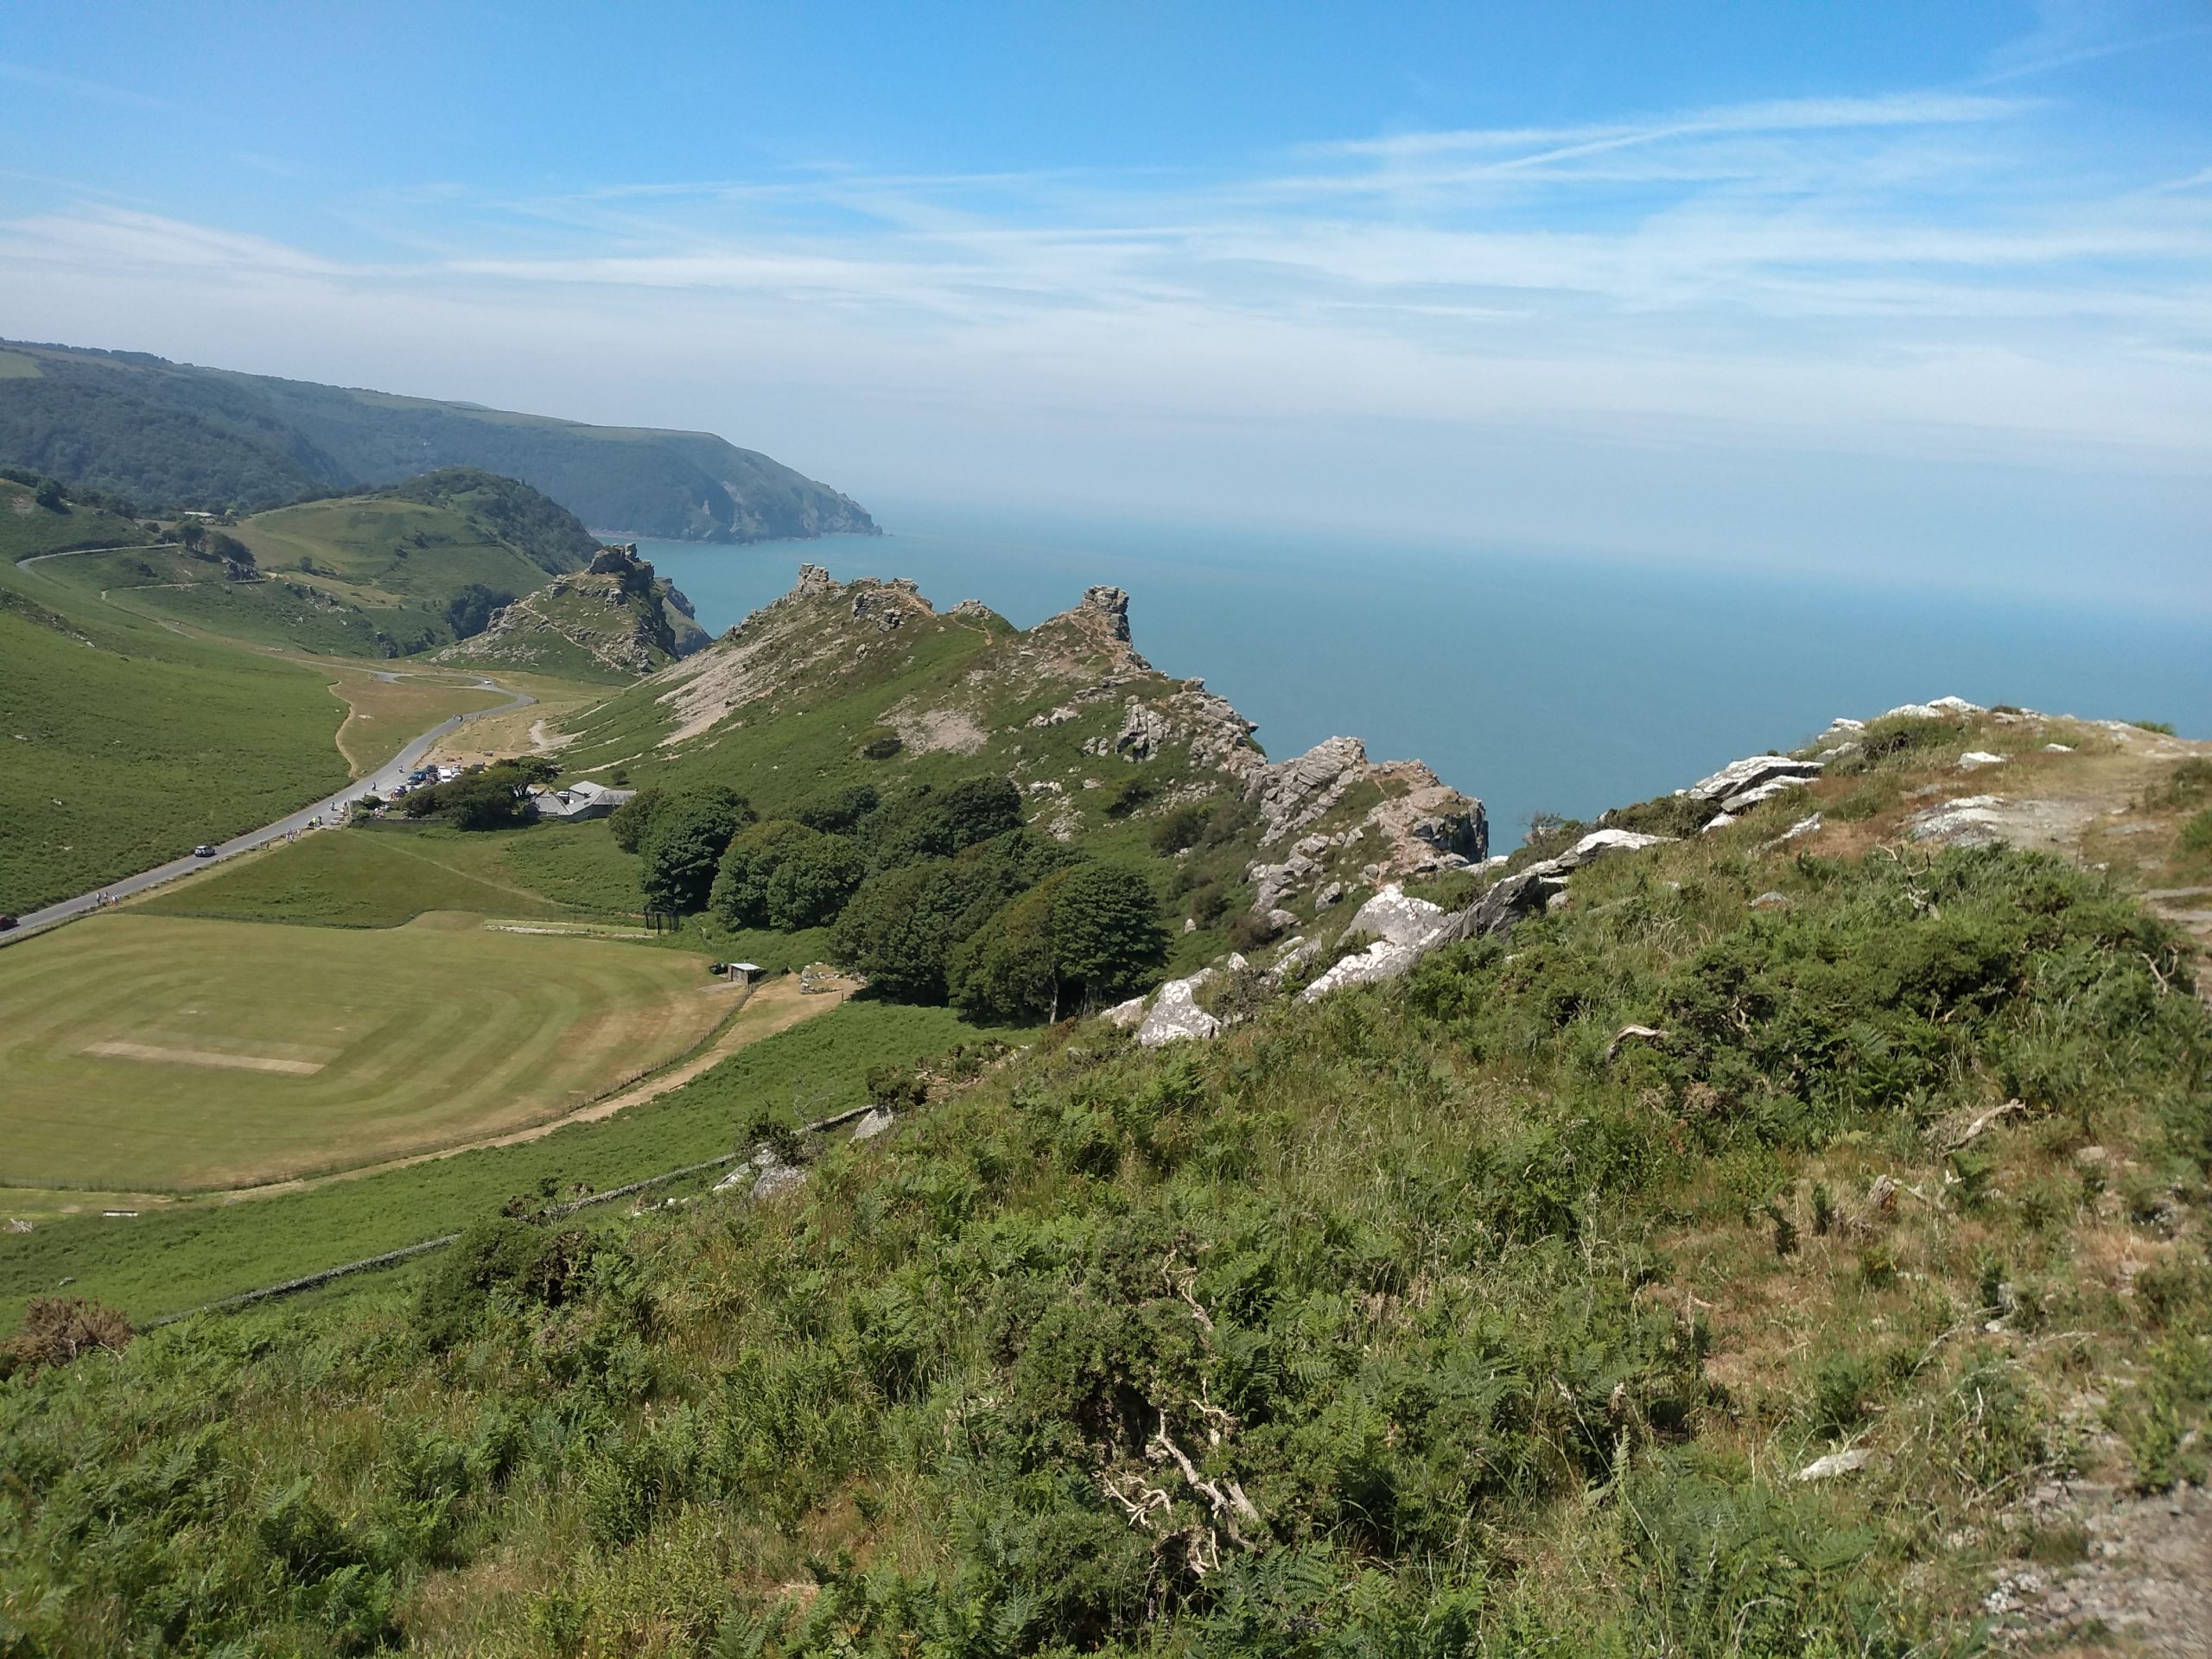 A Walk to The Valley of the Rocks